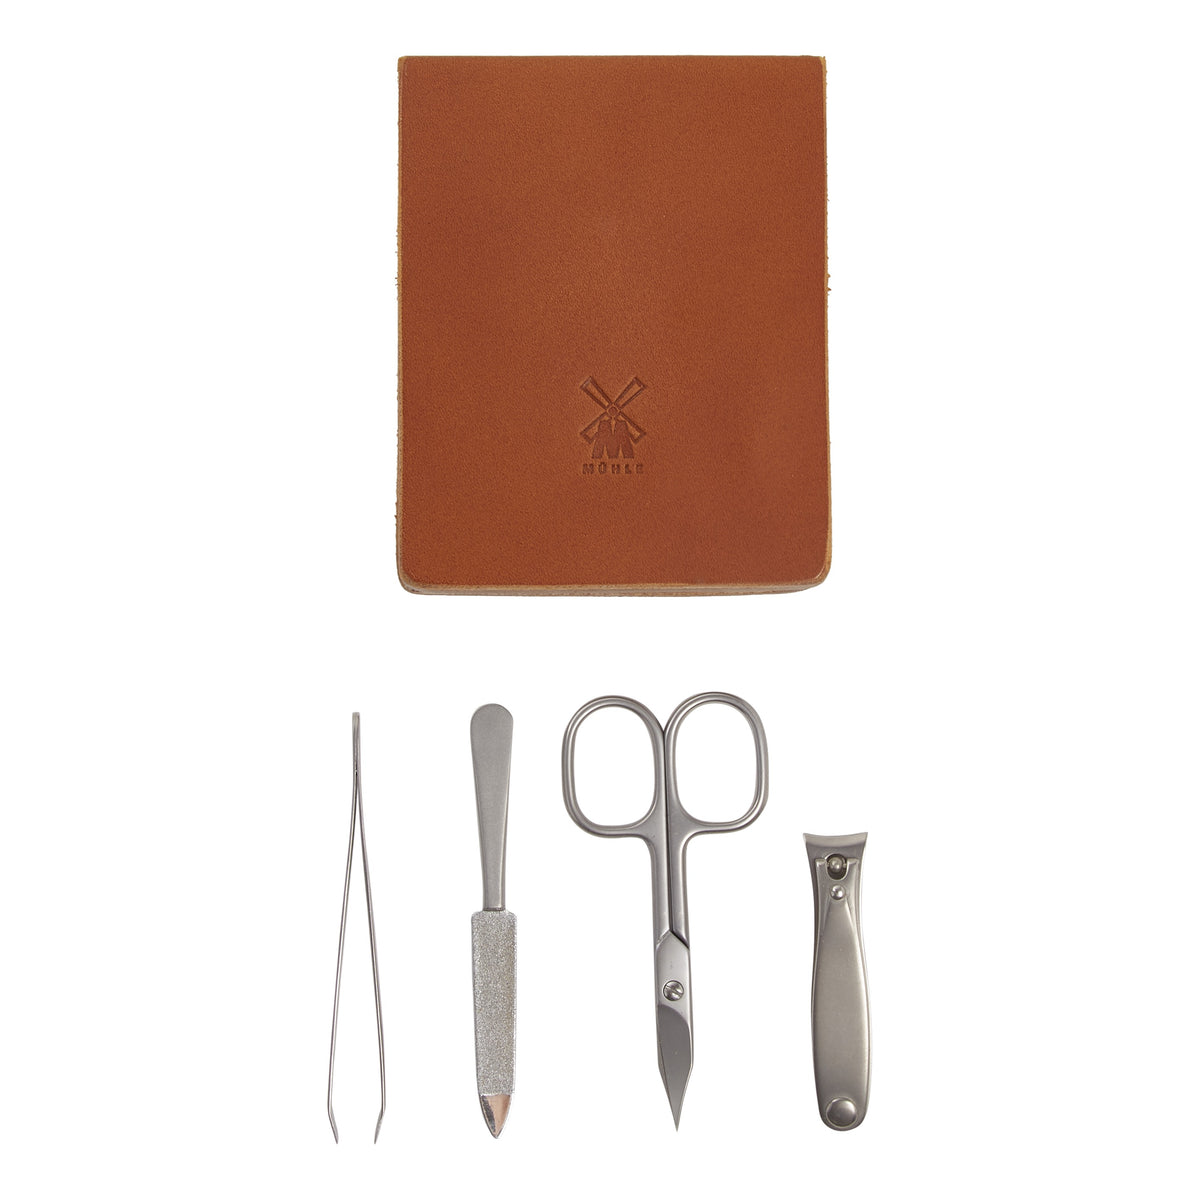 An elegant brown Muhle Leather Manicure Set with scissors, pliers, and a notebook from KirbyAllison.com.